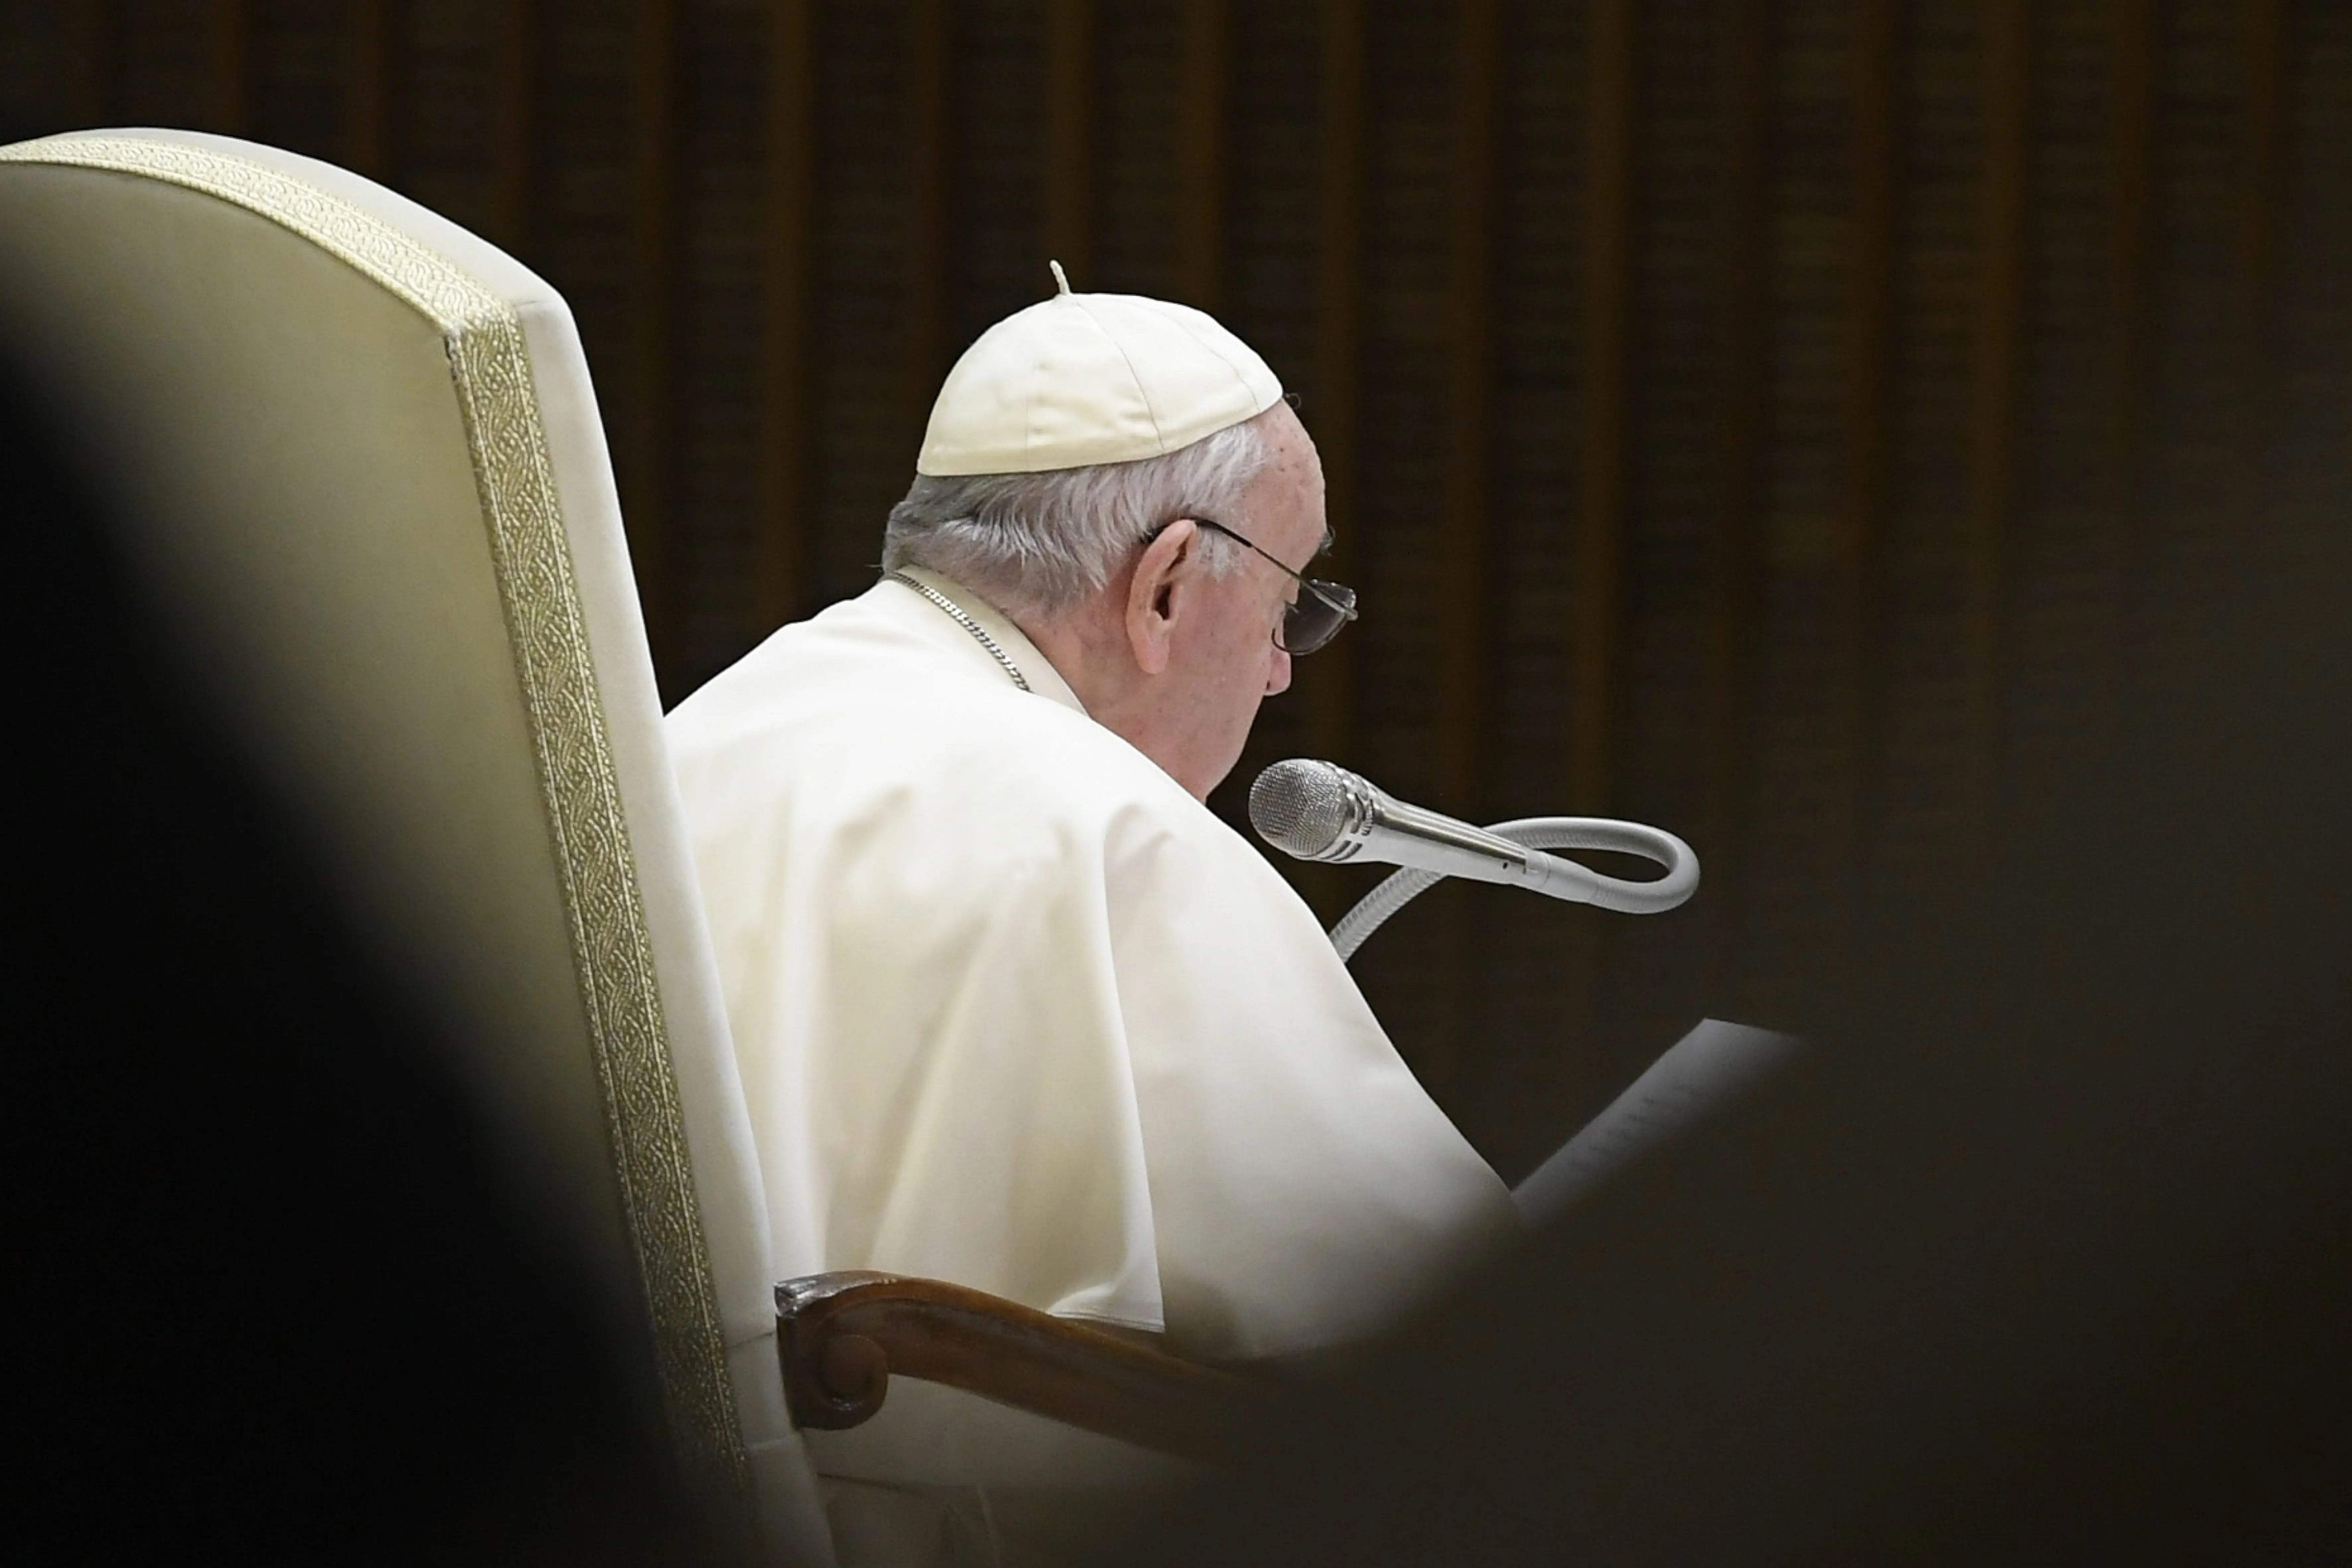 Paranafloden Bevidst moden Being homosexual is not a crime,' Pope Francis reiterates in new interview  | Catholic News Agency